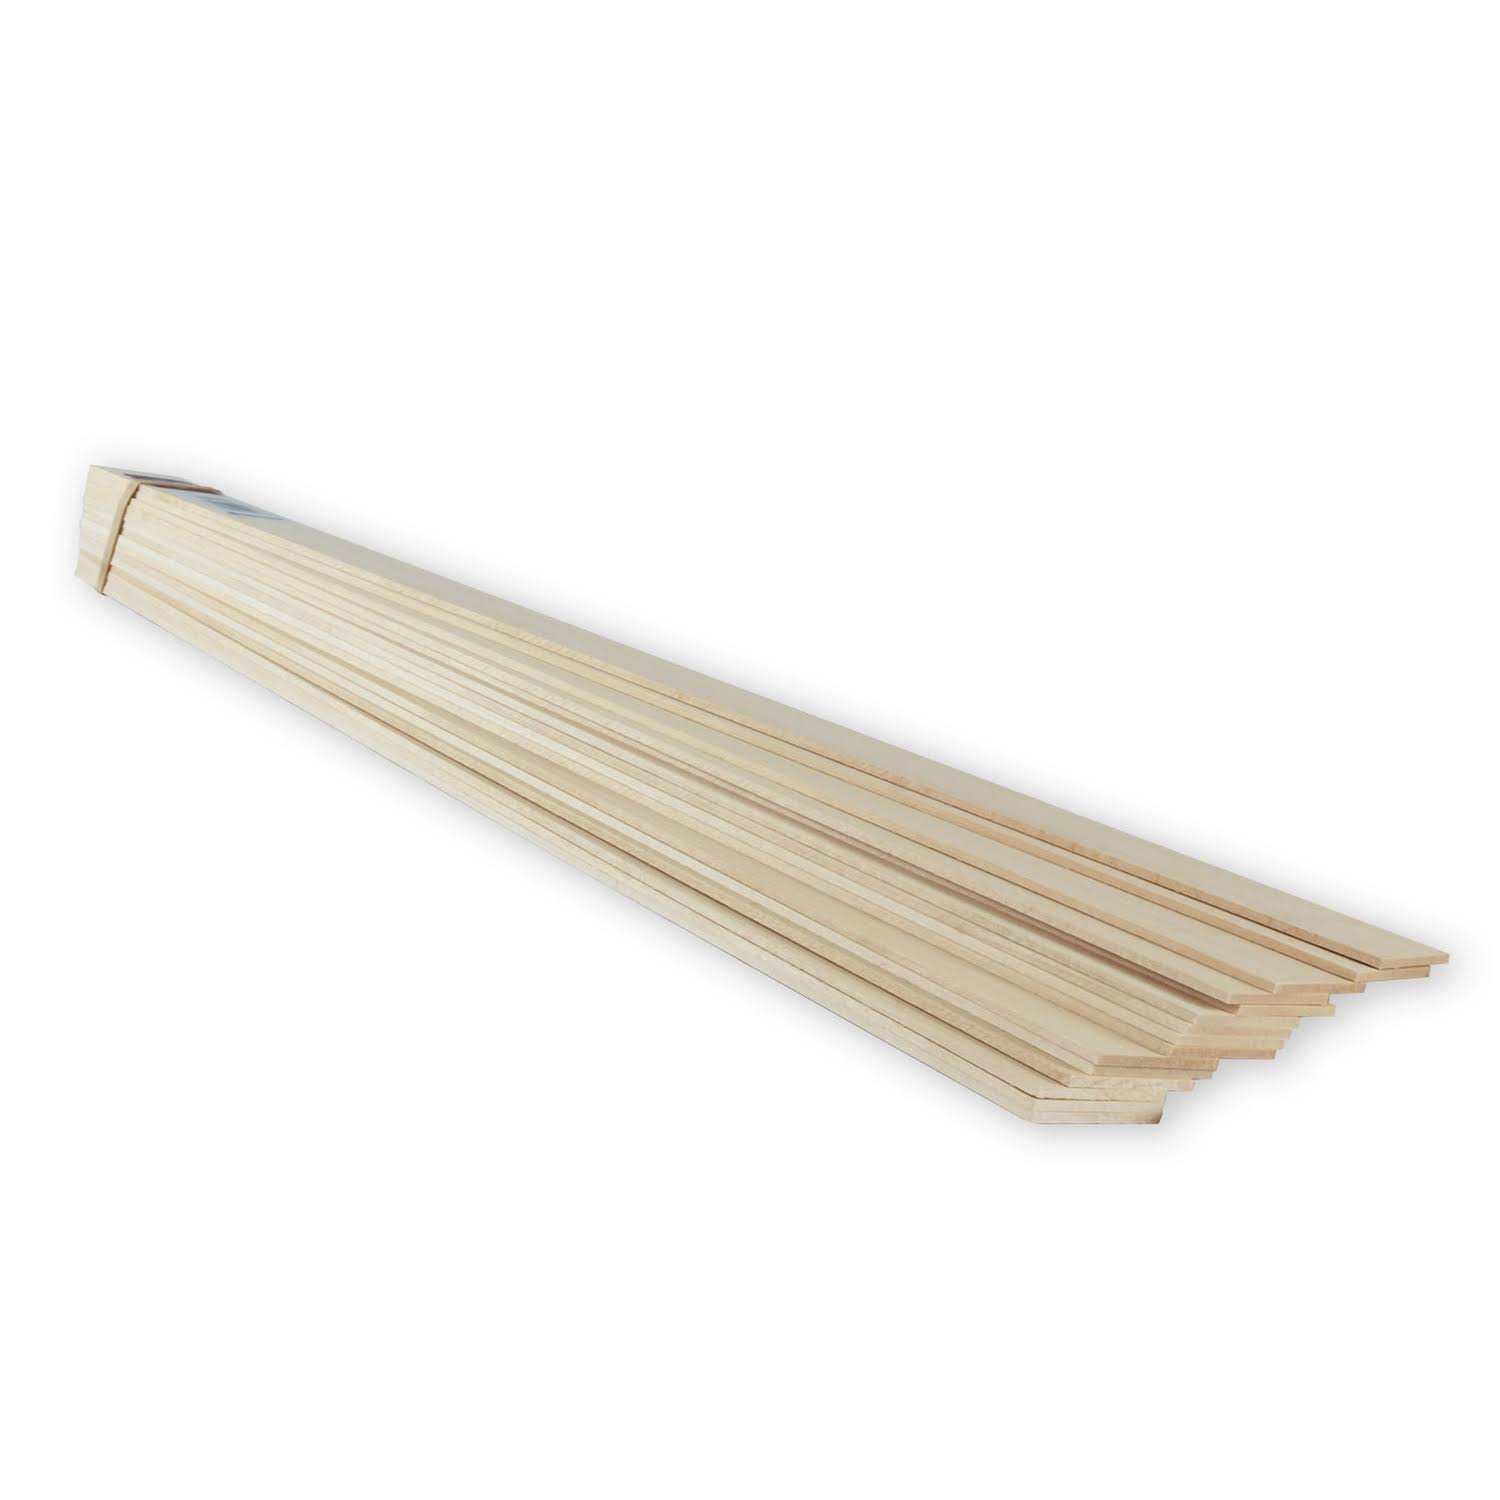 Midwest Basswood Sheets 1/8 x 2 x 24"